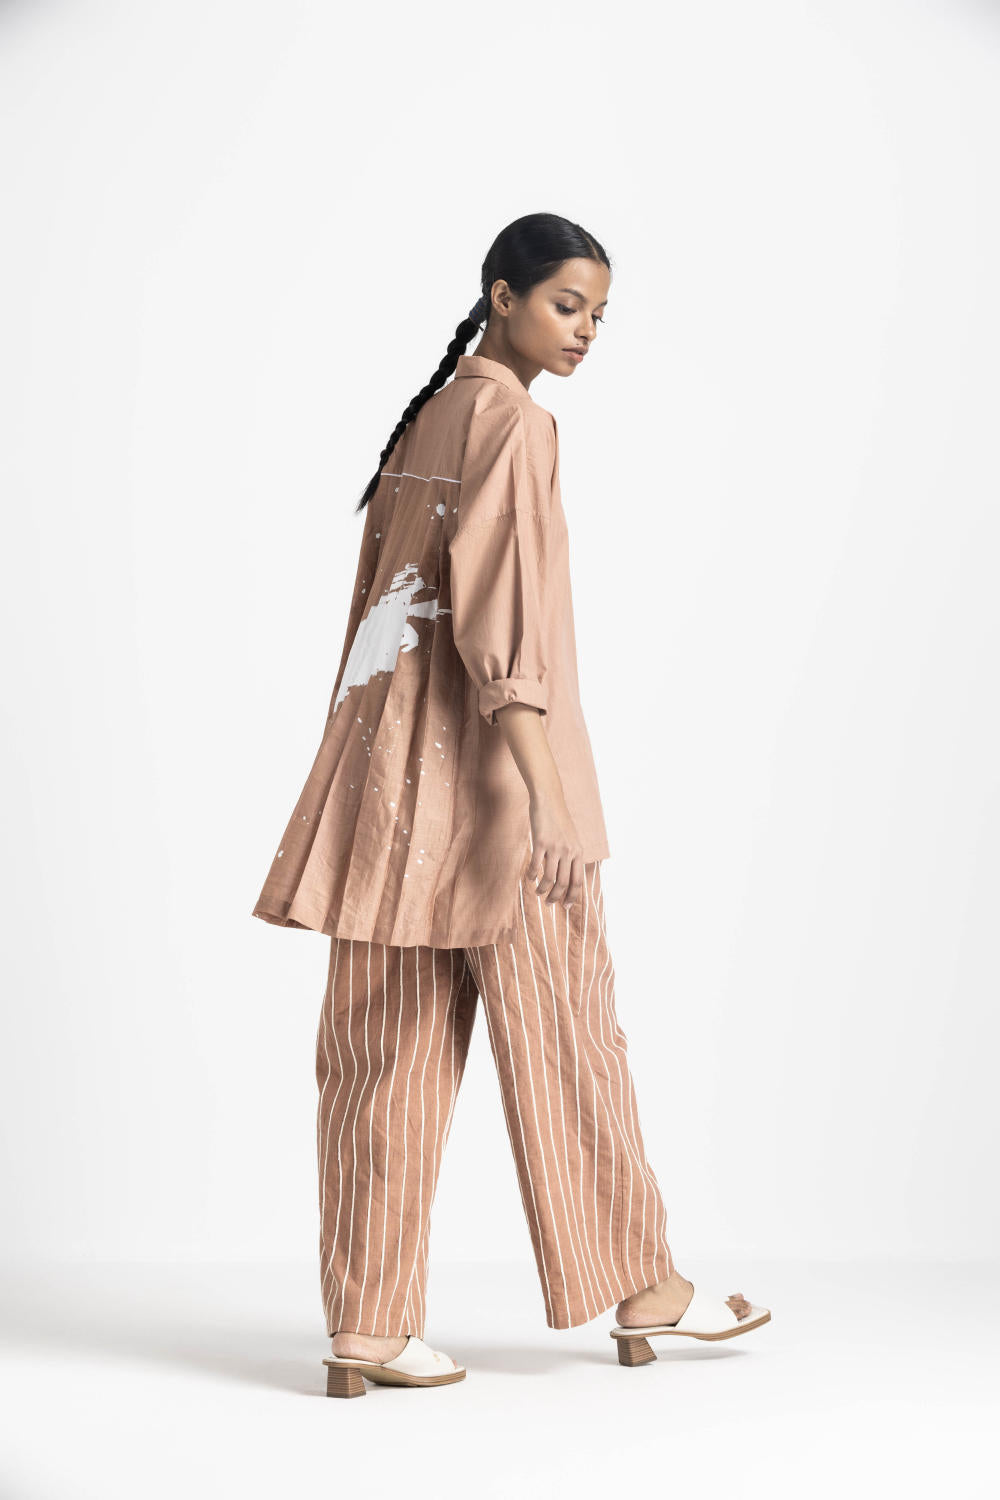 COLLARED BACK PLEAT SHIRT CO ORD - CHAMPAGNE